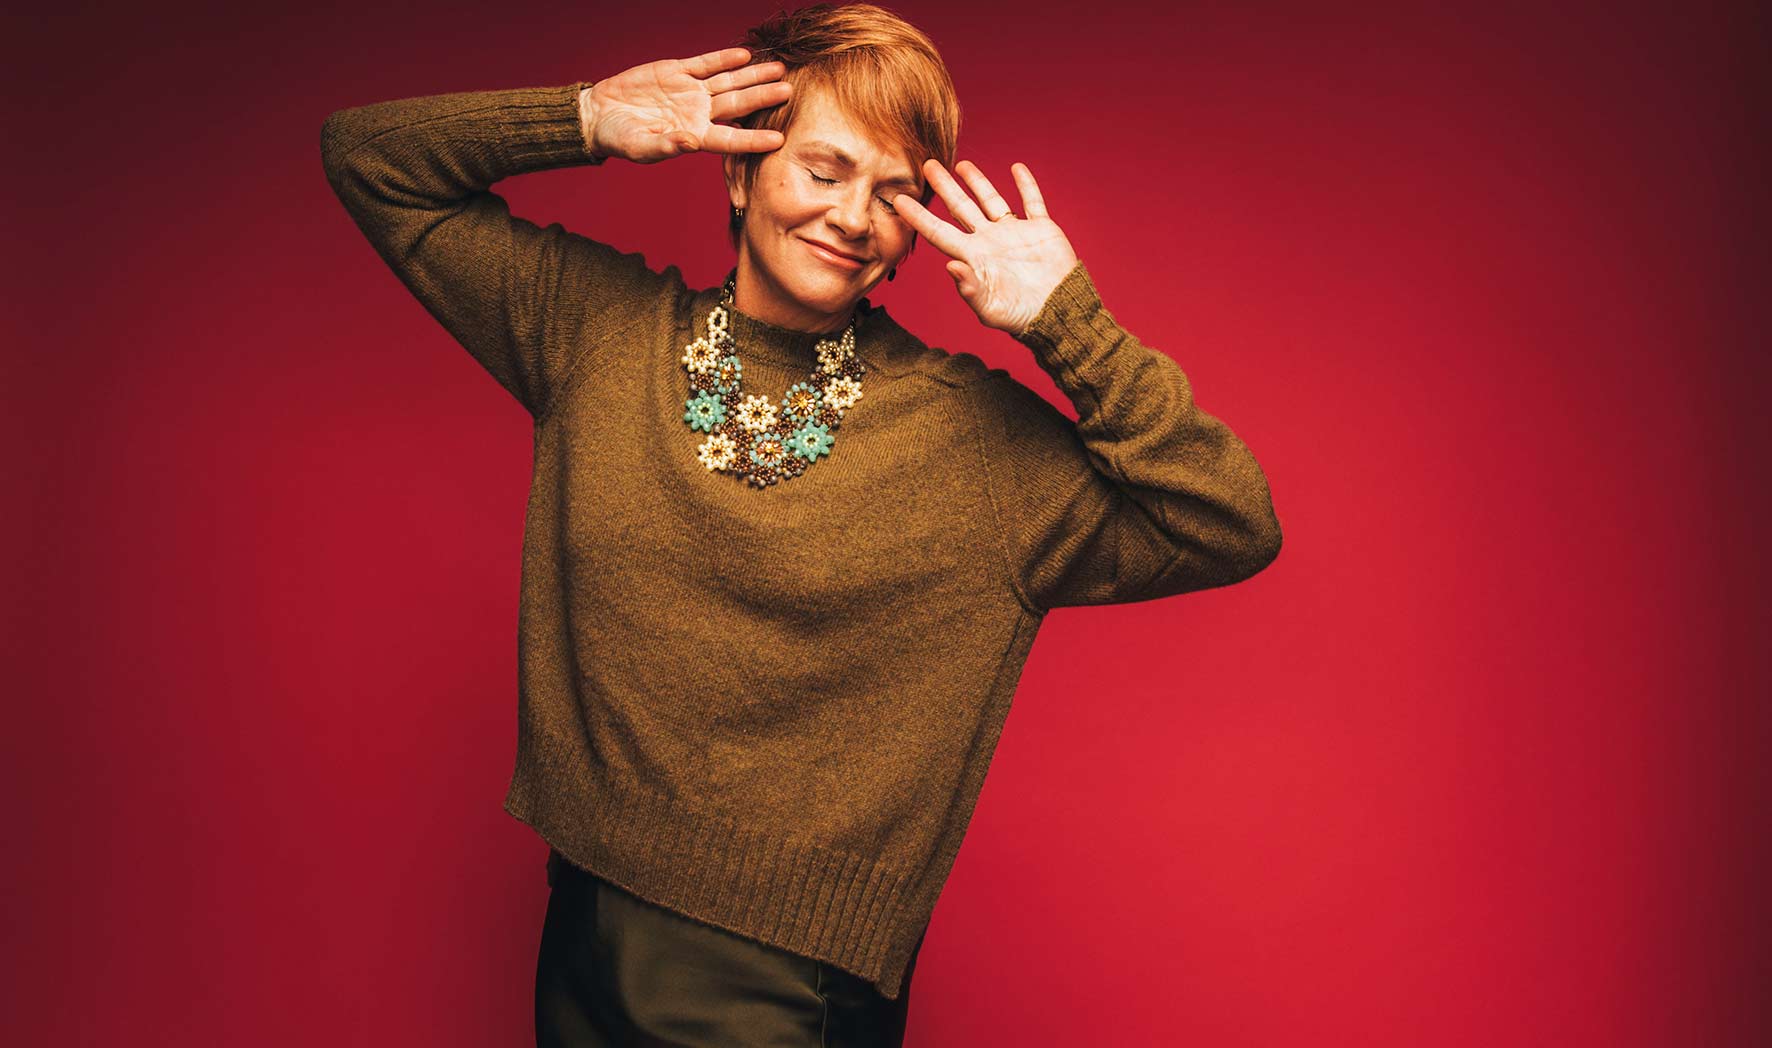 An Acoustic Evening with Shawn Colvin